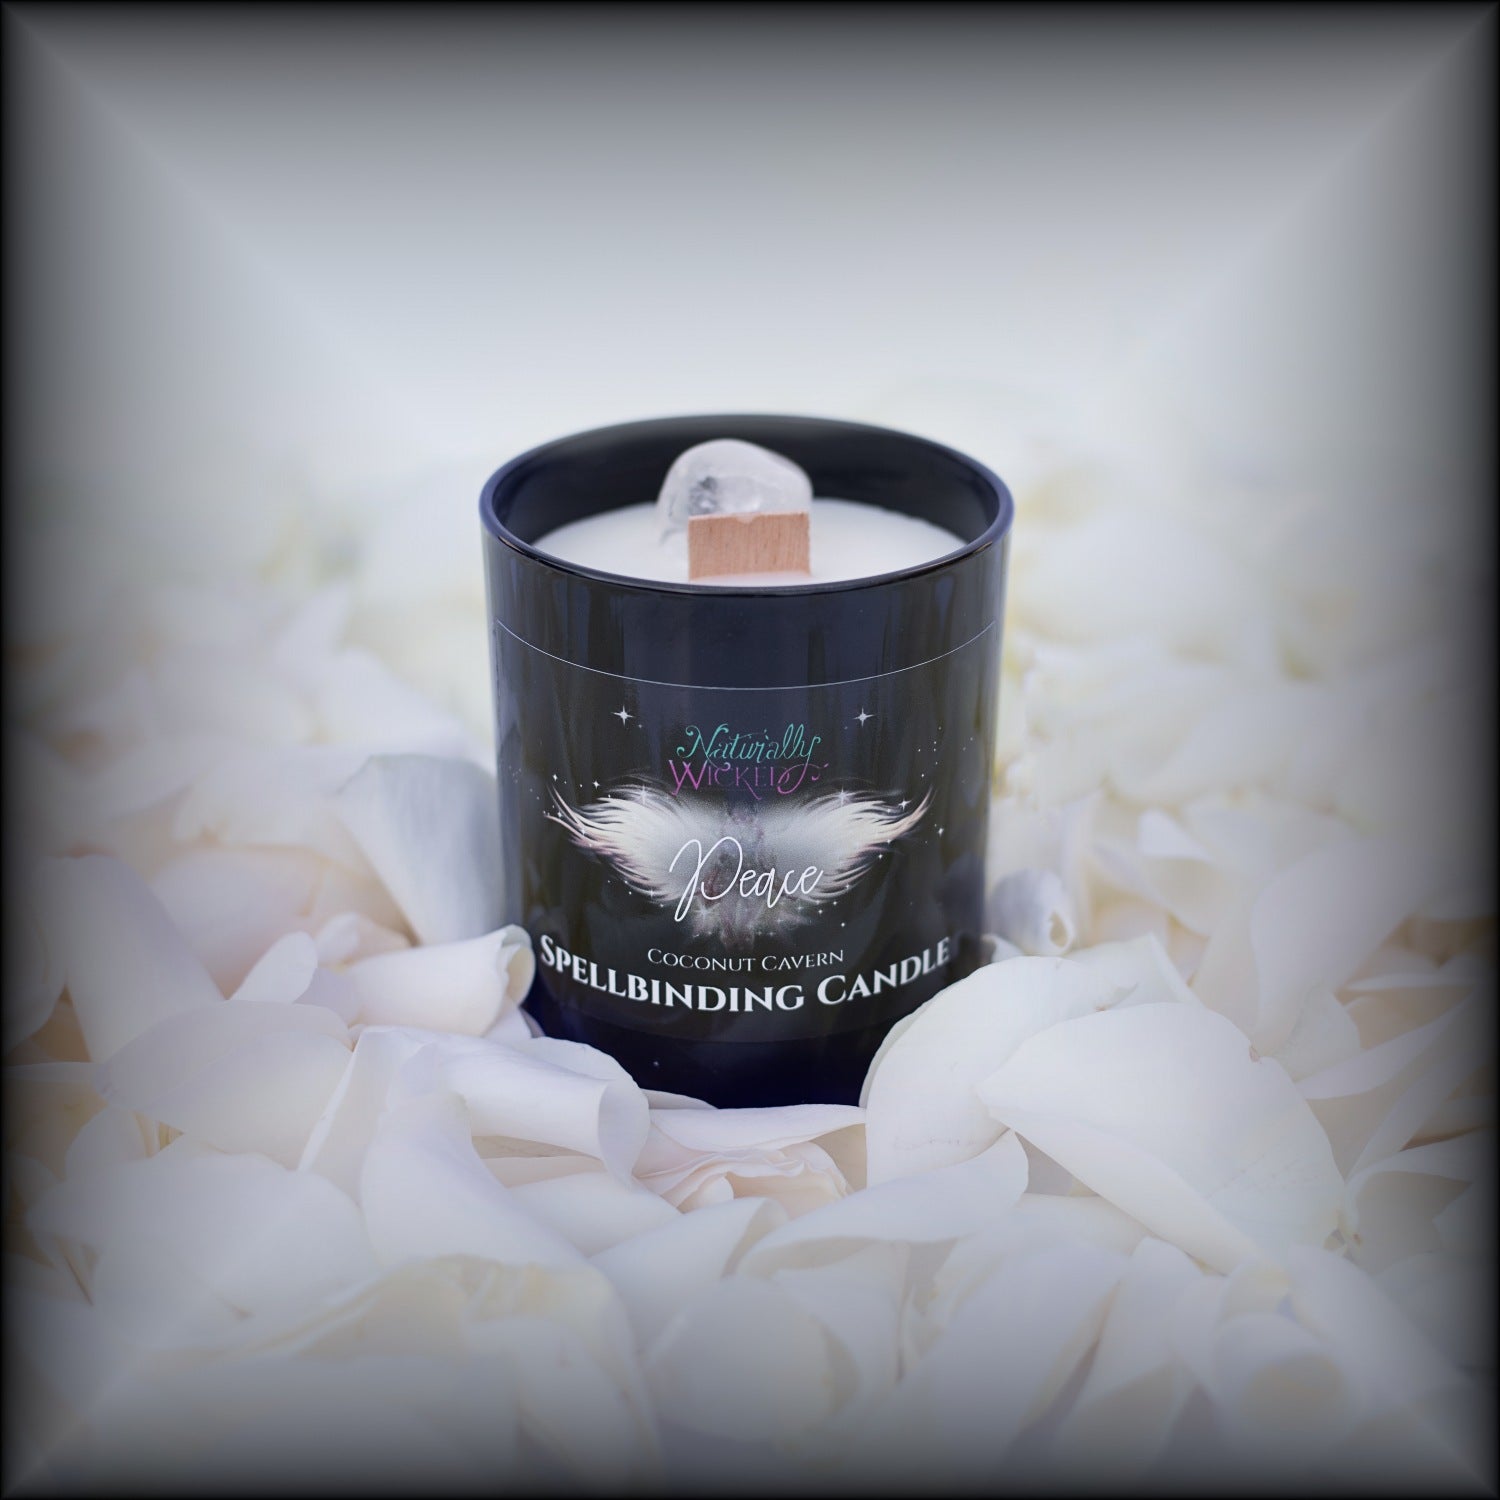 A Scenic View Of The Perfect Spell Candle Surrounded By Pure White Rose Petals. Naturally Wicked Spellbinding Peace Candle Proudly Presents It's Dark Black Gloss Label With A Beautiful Angel Of Peace On The Front. The Candle Features Plant-based Smooth Pure White Wax, A Wood Wick And A Beautiful Clear Quartz Crystal.